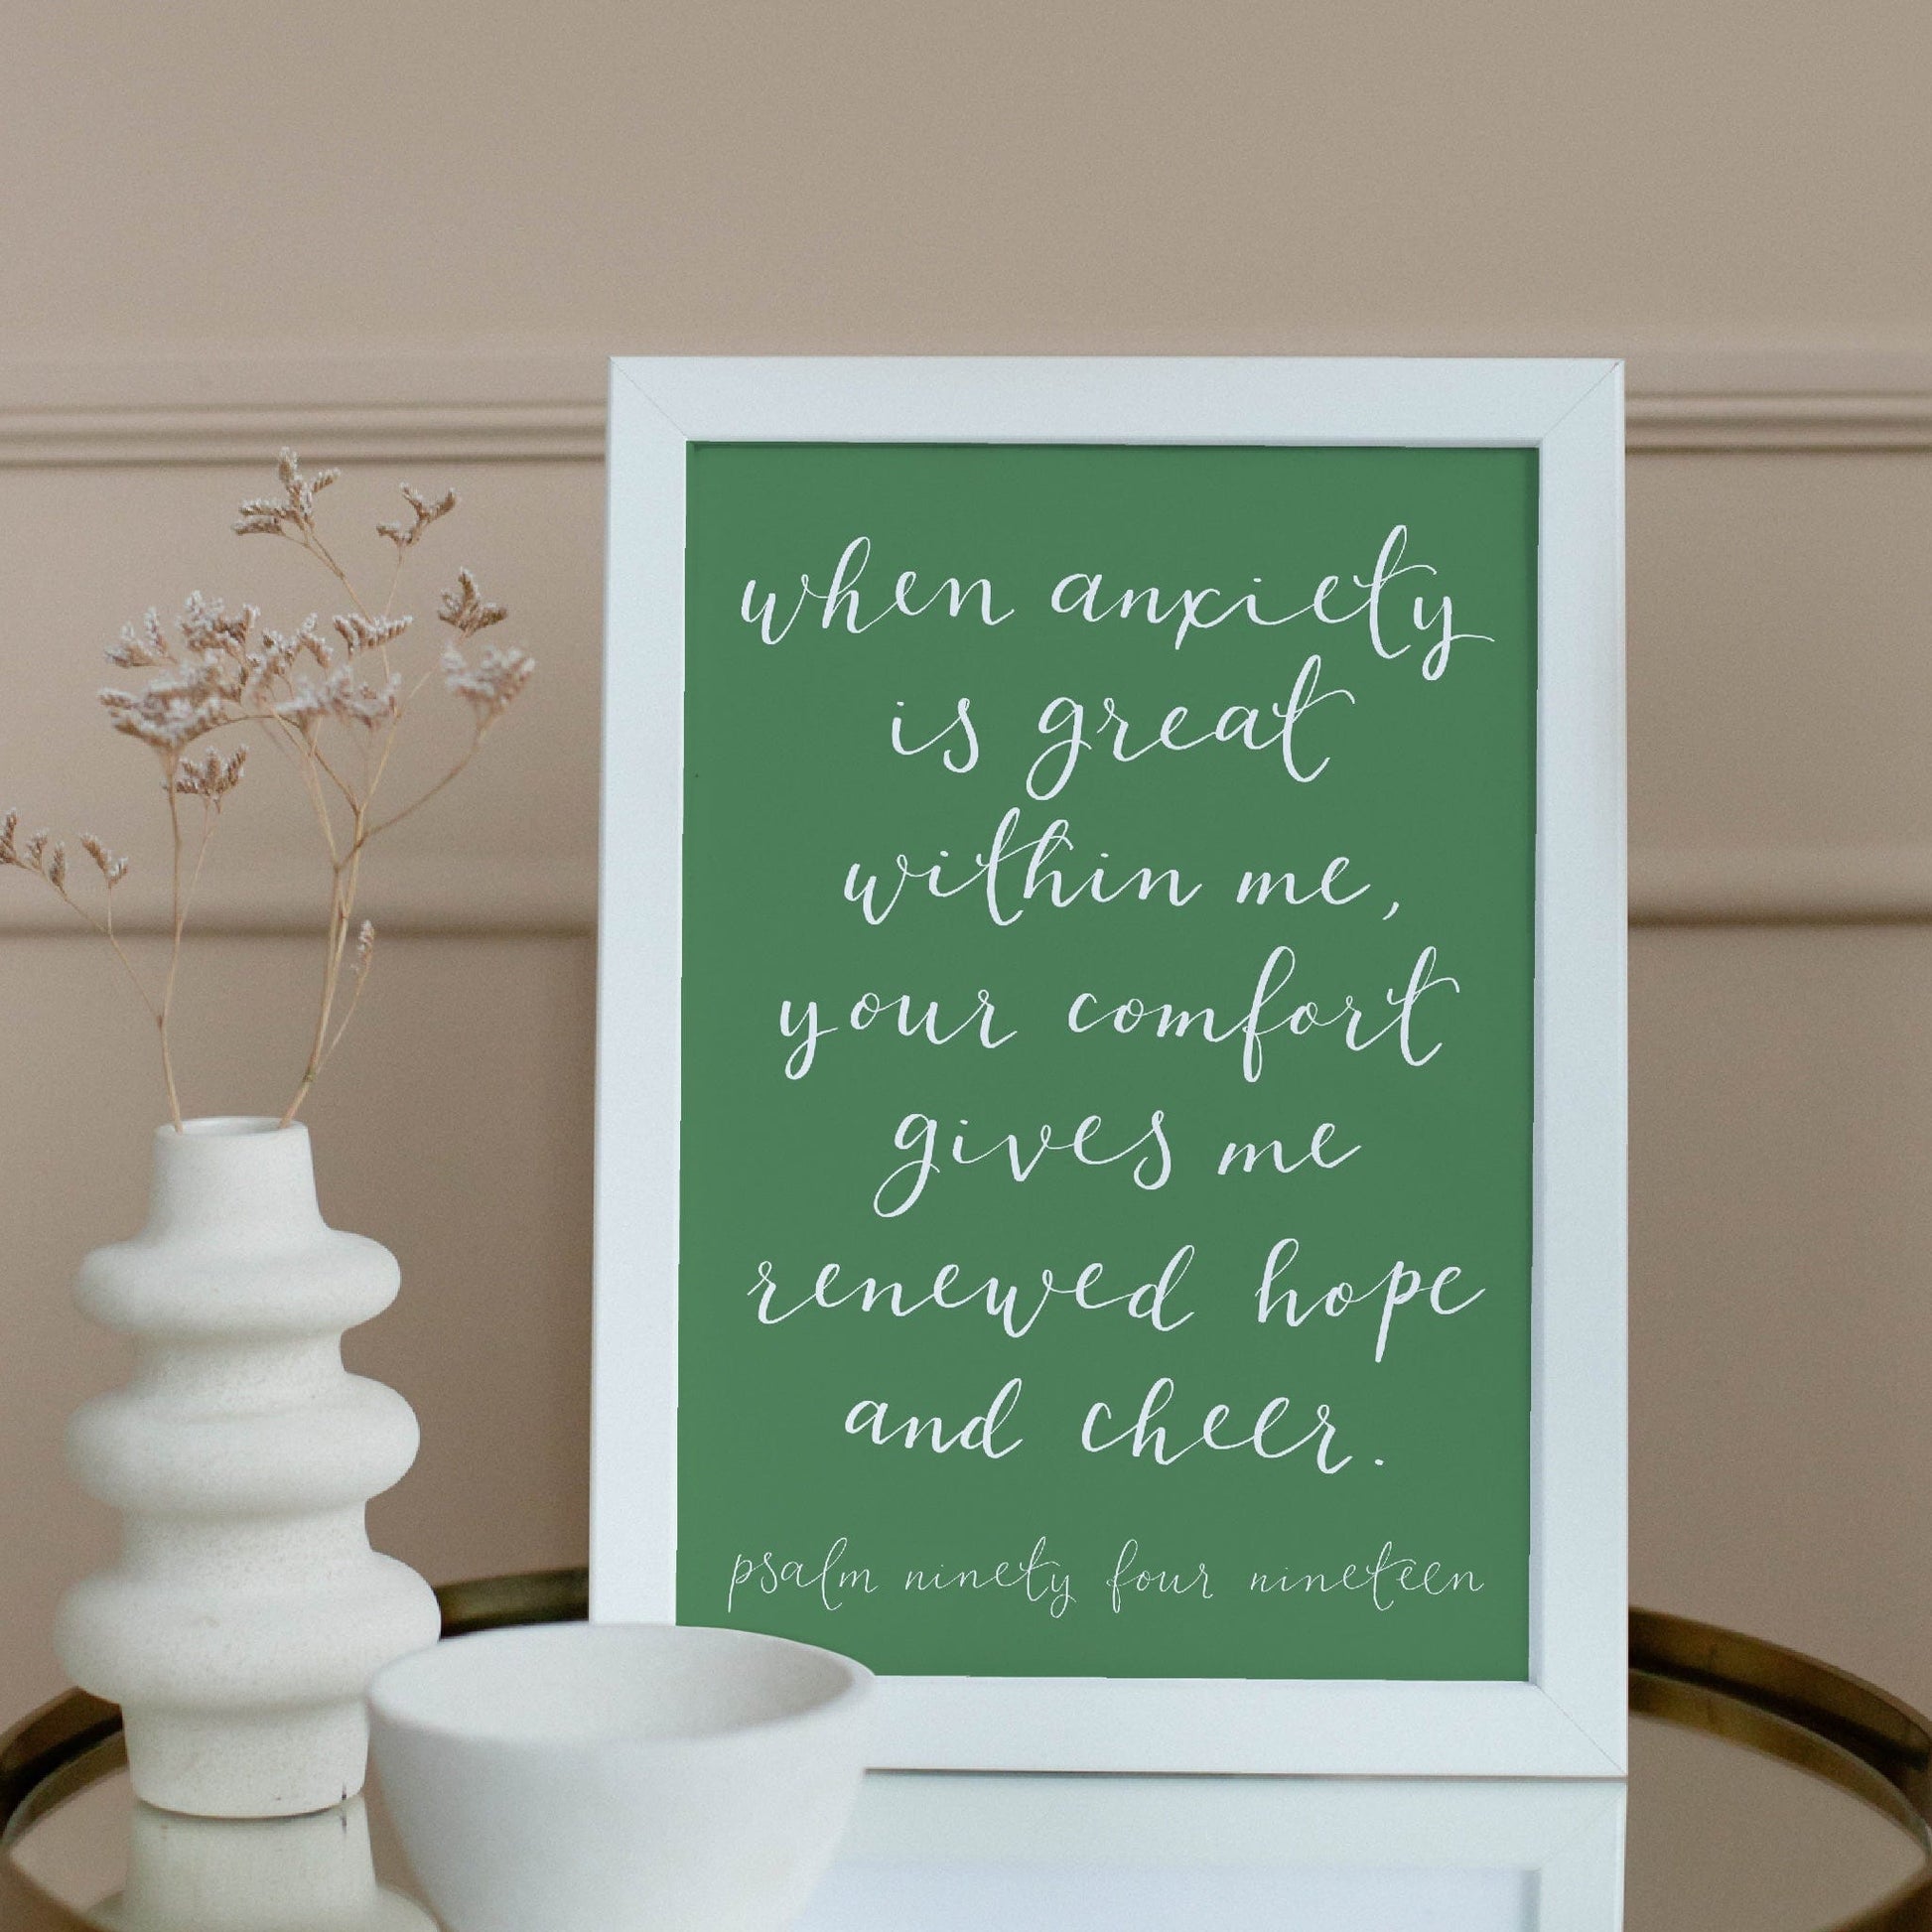 A4 Christian Print - When anxiety is great within me - green Blush pink And Hope Designs Print